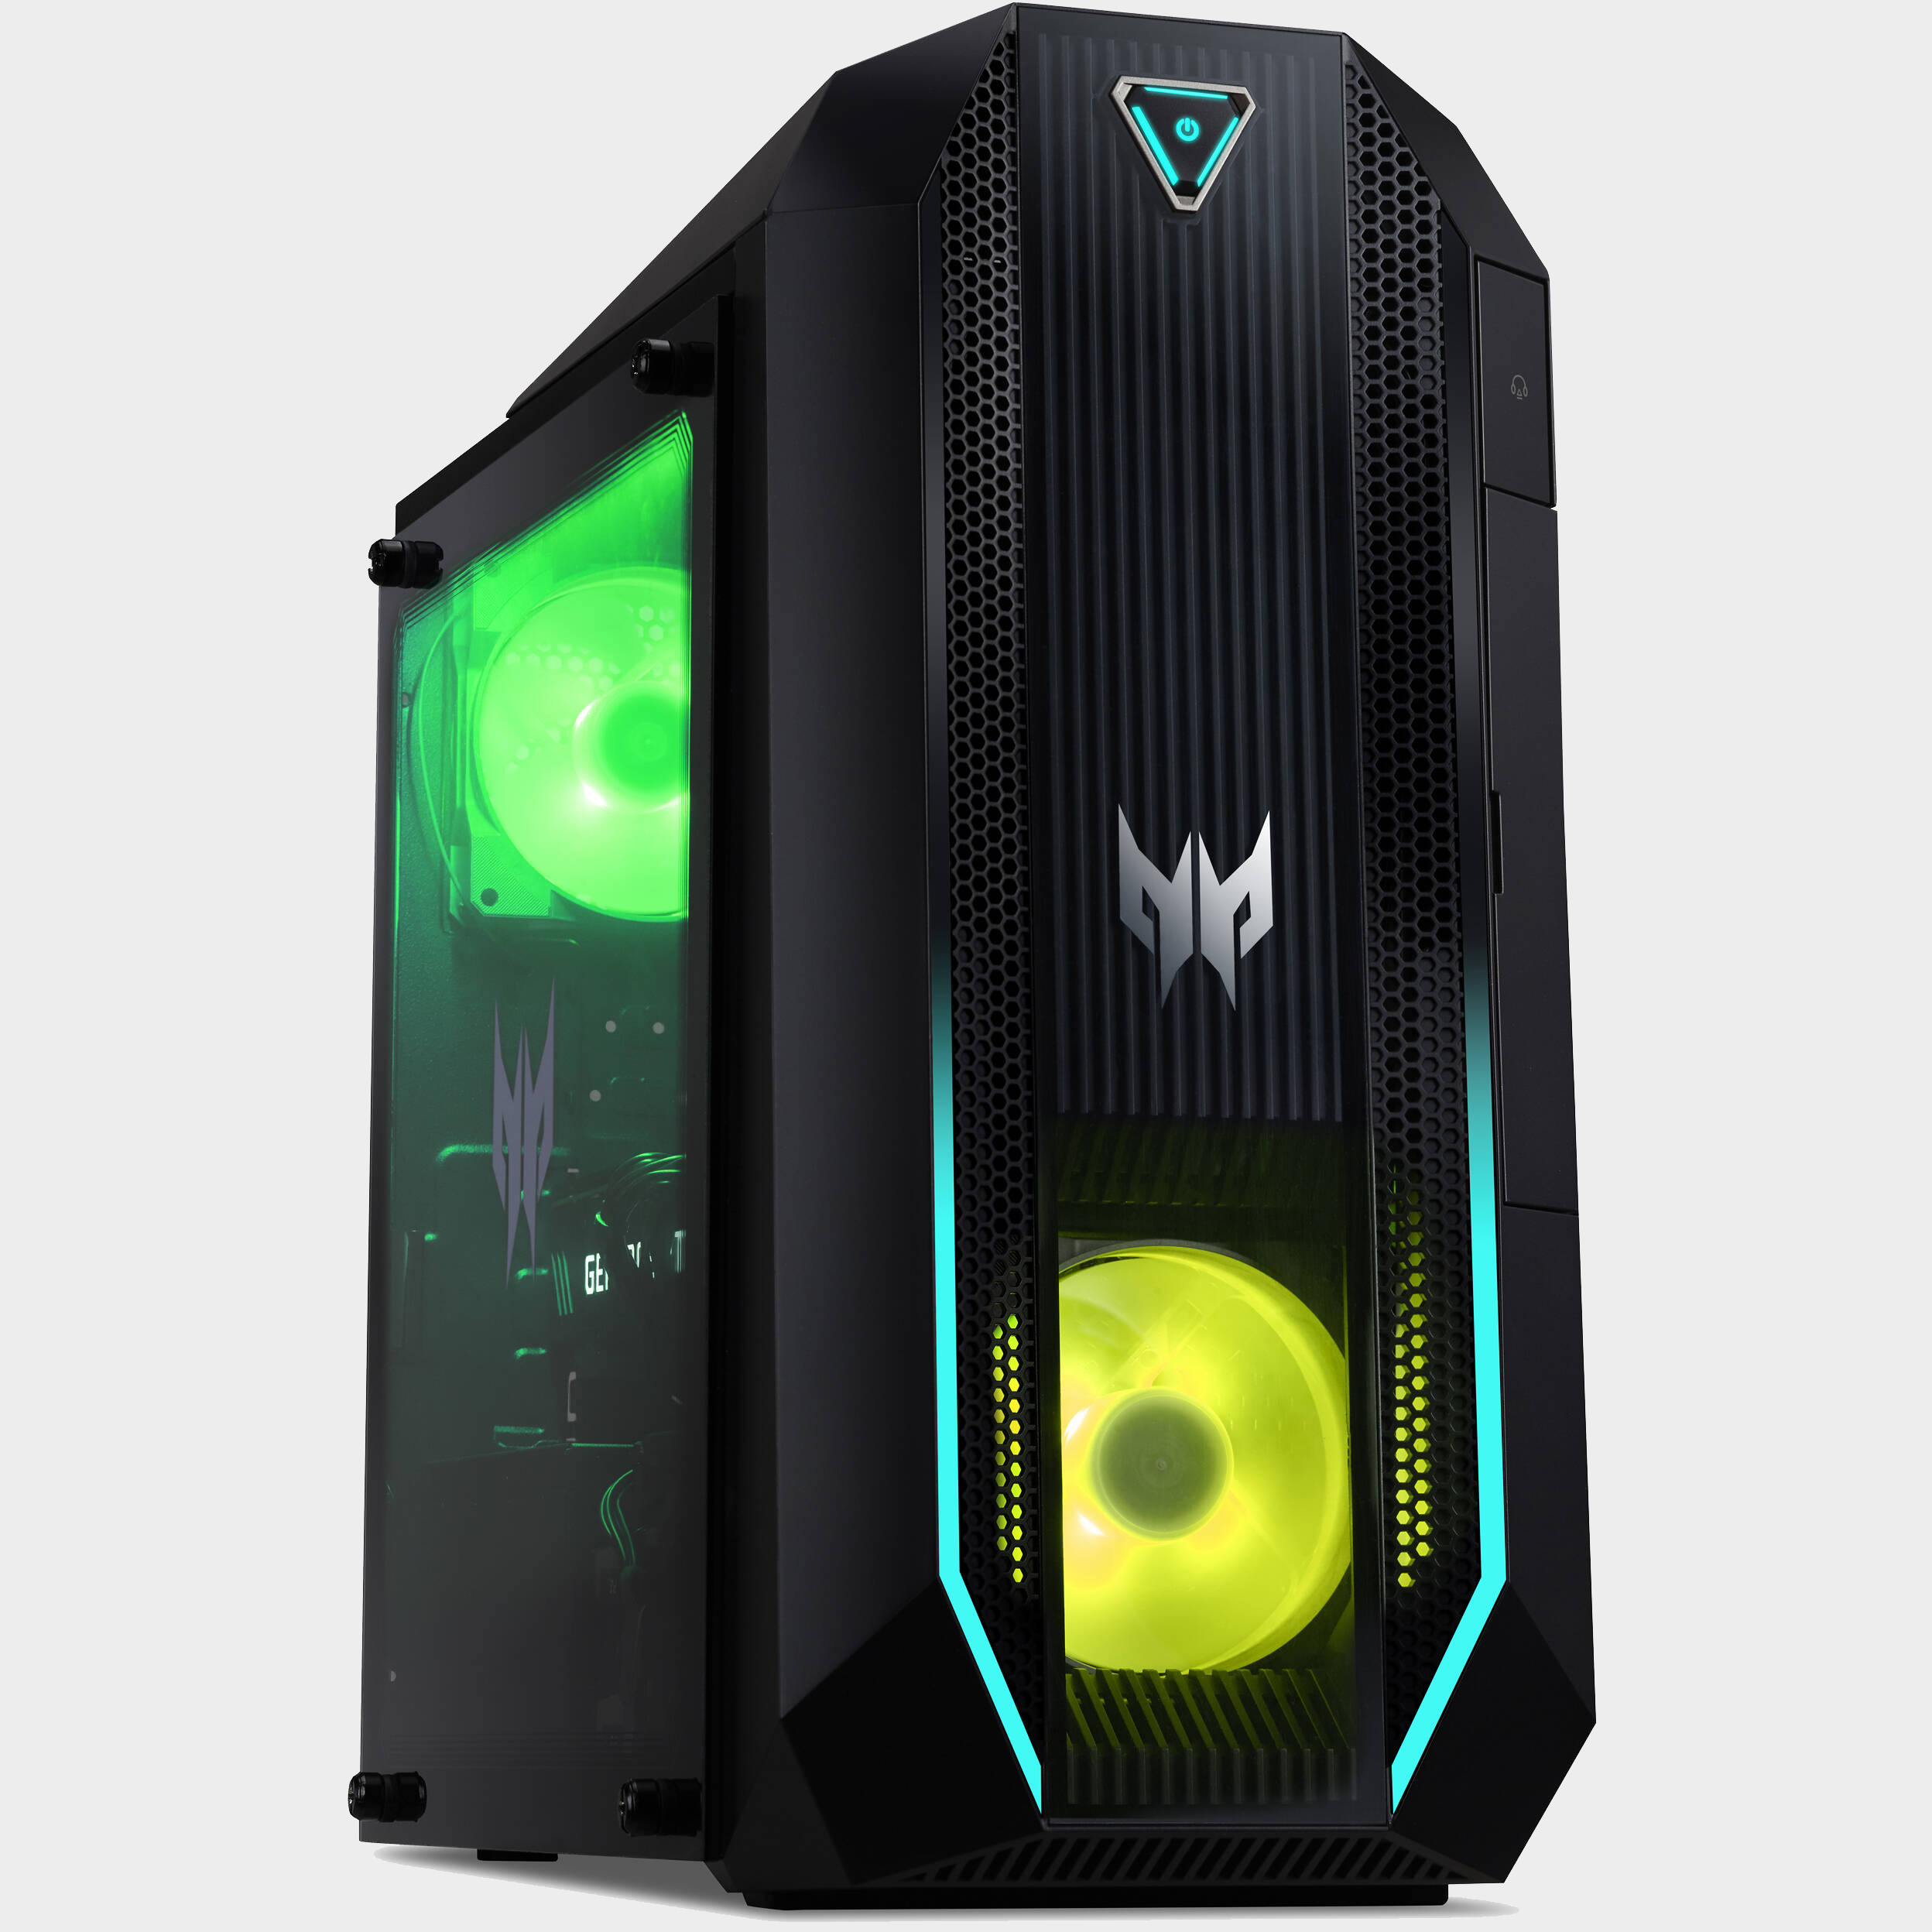 DIY Is Getting A Prebuilt Gaming Pc Worth It for Streamer